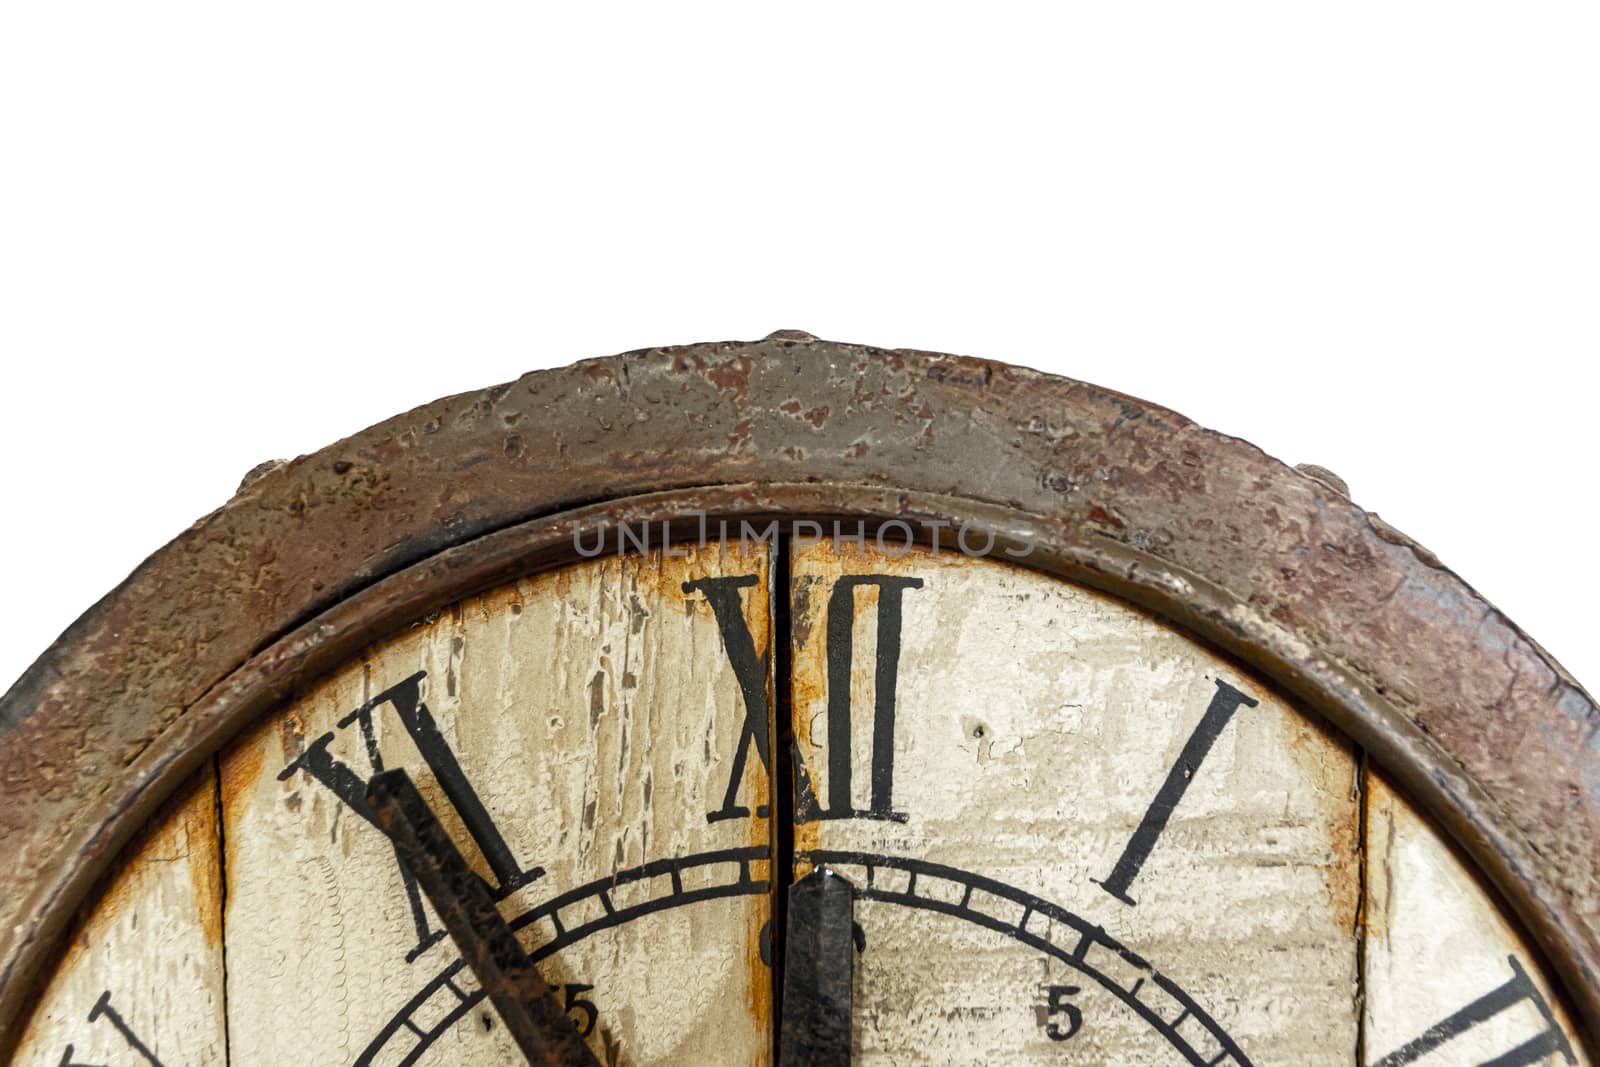 Old vintage and retro analogue clock displaying five minutes to twelve. Worn-out and grunge style with wooden background. Front view.